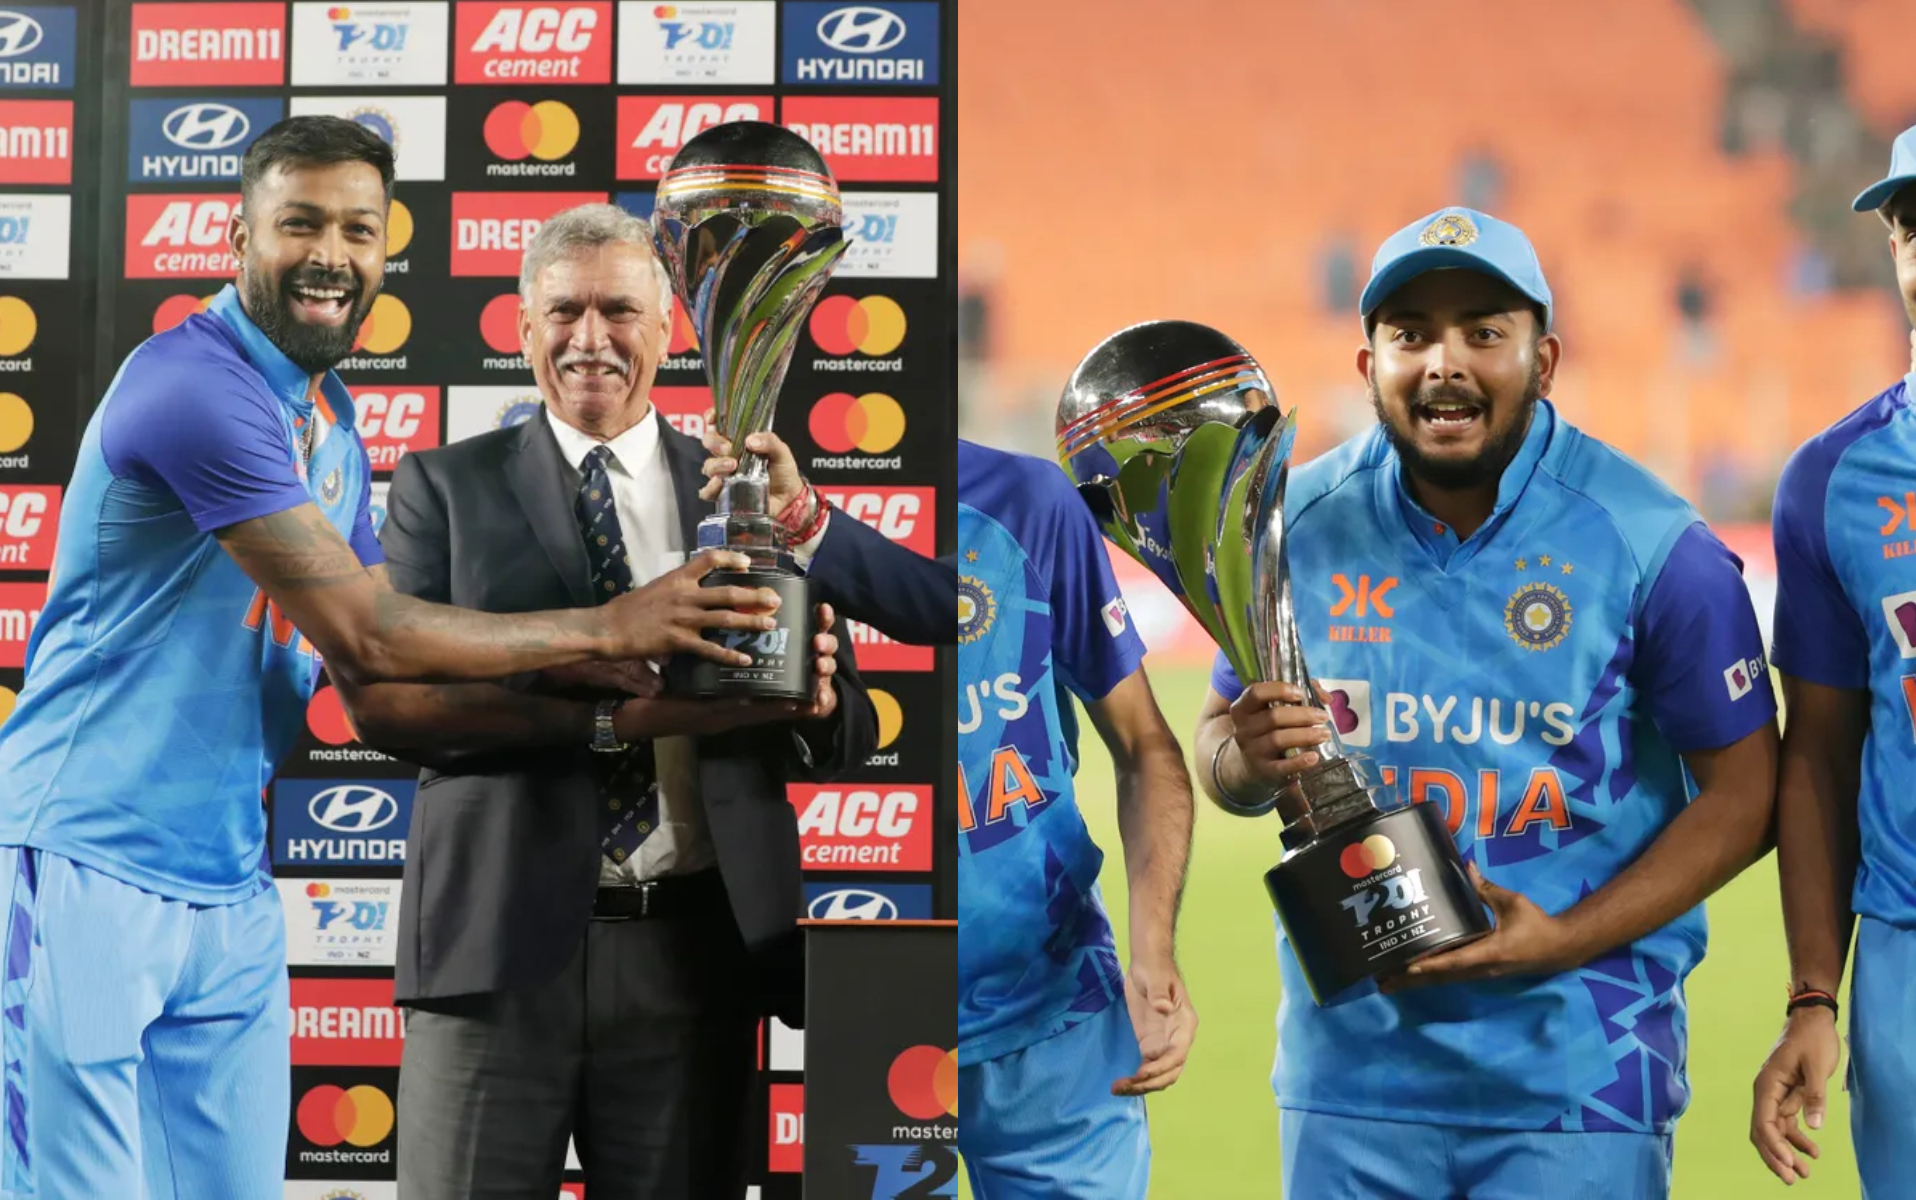 India defeated New Zealand by 168 runs in third T20I to win the series 2-1 | BCCI